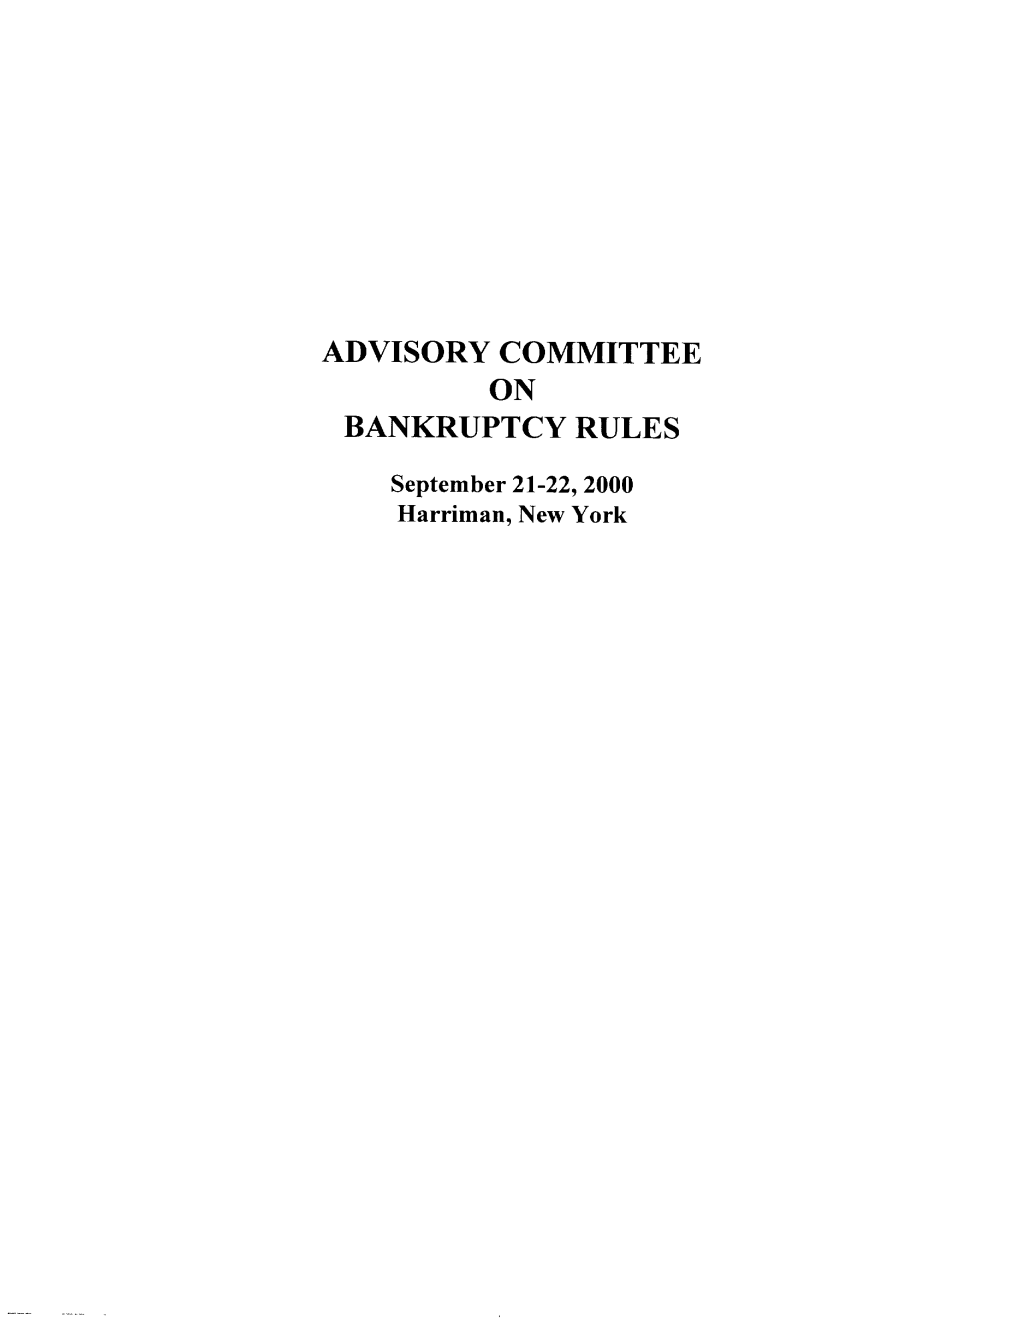 Advisory Committee on Bankruptcy Rules